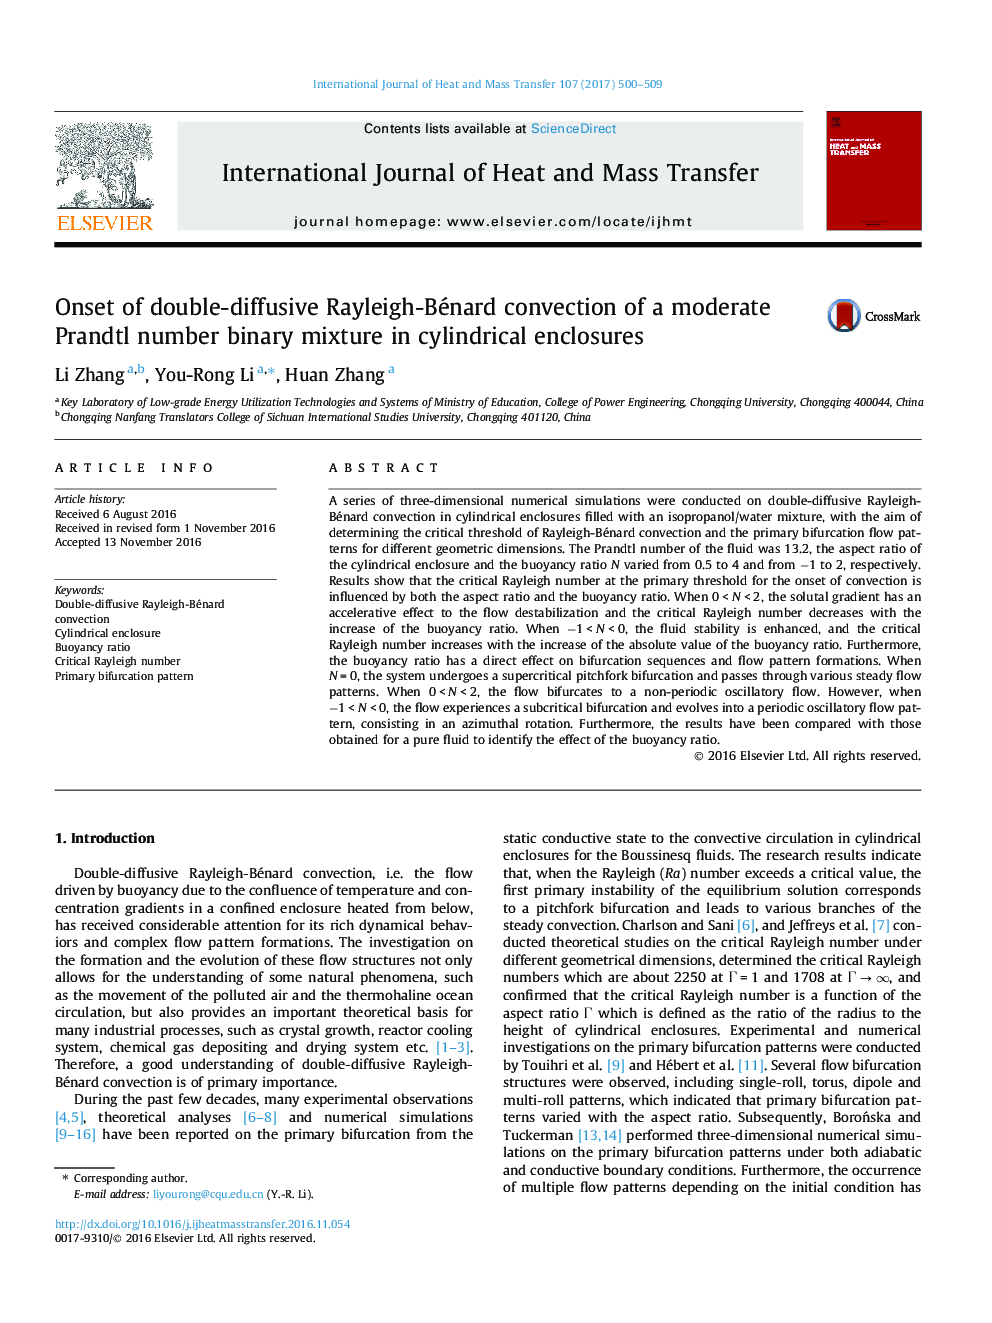 Onset of double-diffusive Rayleigh-Bénard convection of a moderate Prandtl number binary mixture in cylindrical enclosures